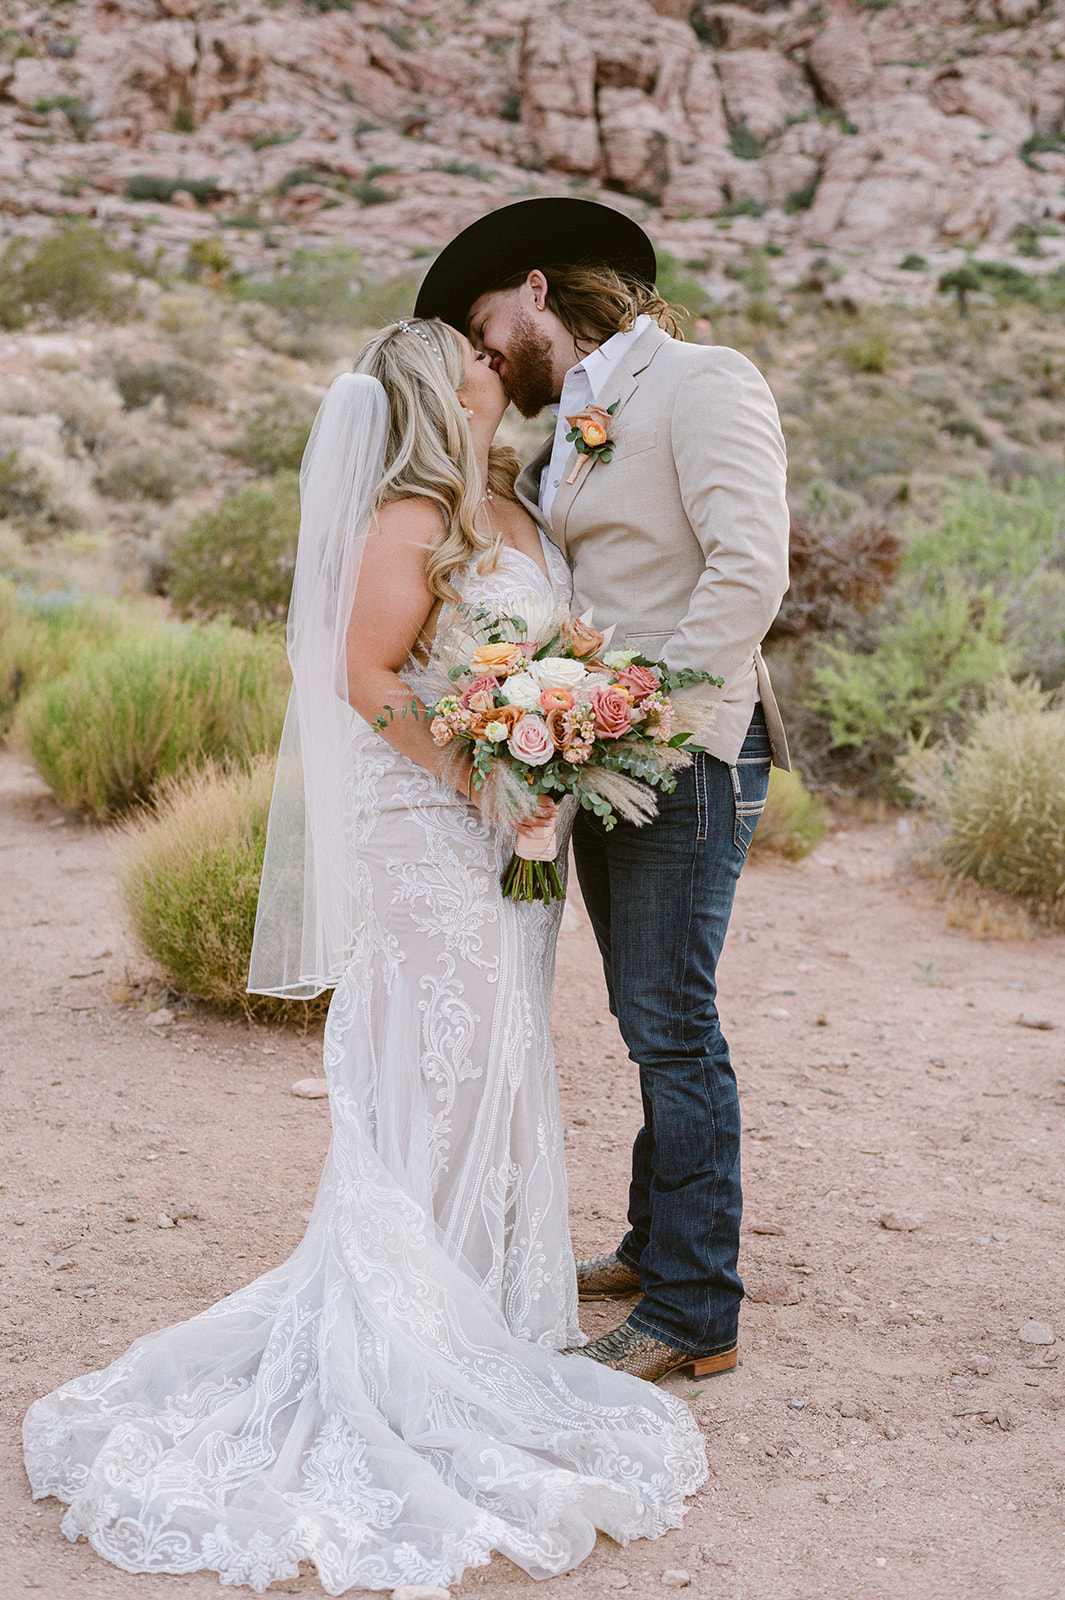 A couple who eloped in Red Rock Canyon Nevada share a kiss in front of the red rock mountain backdrop